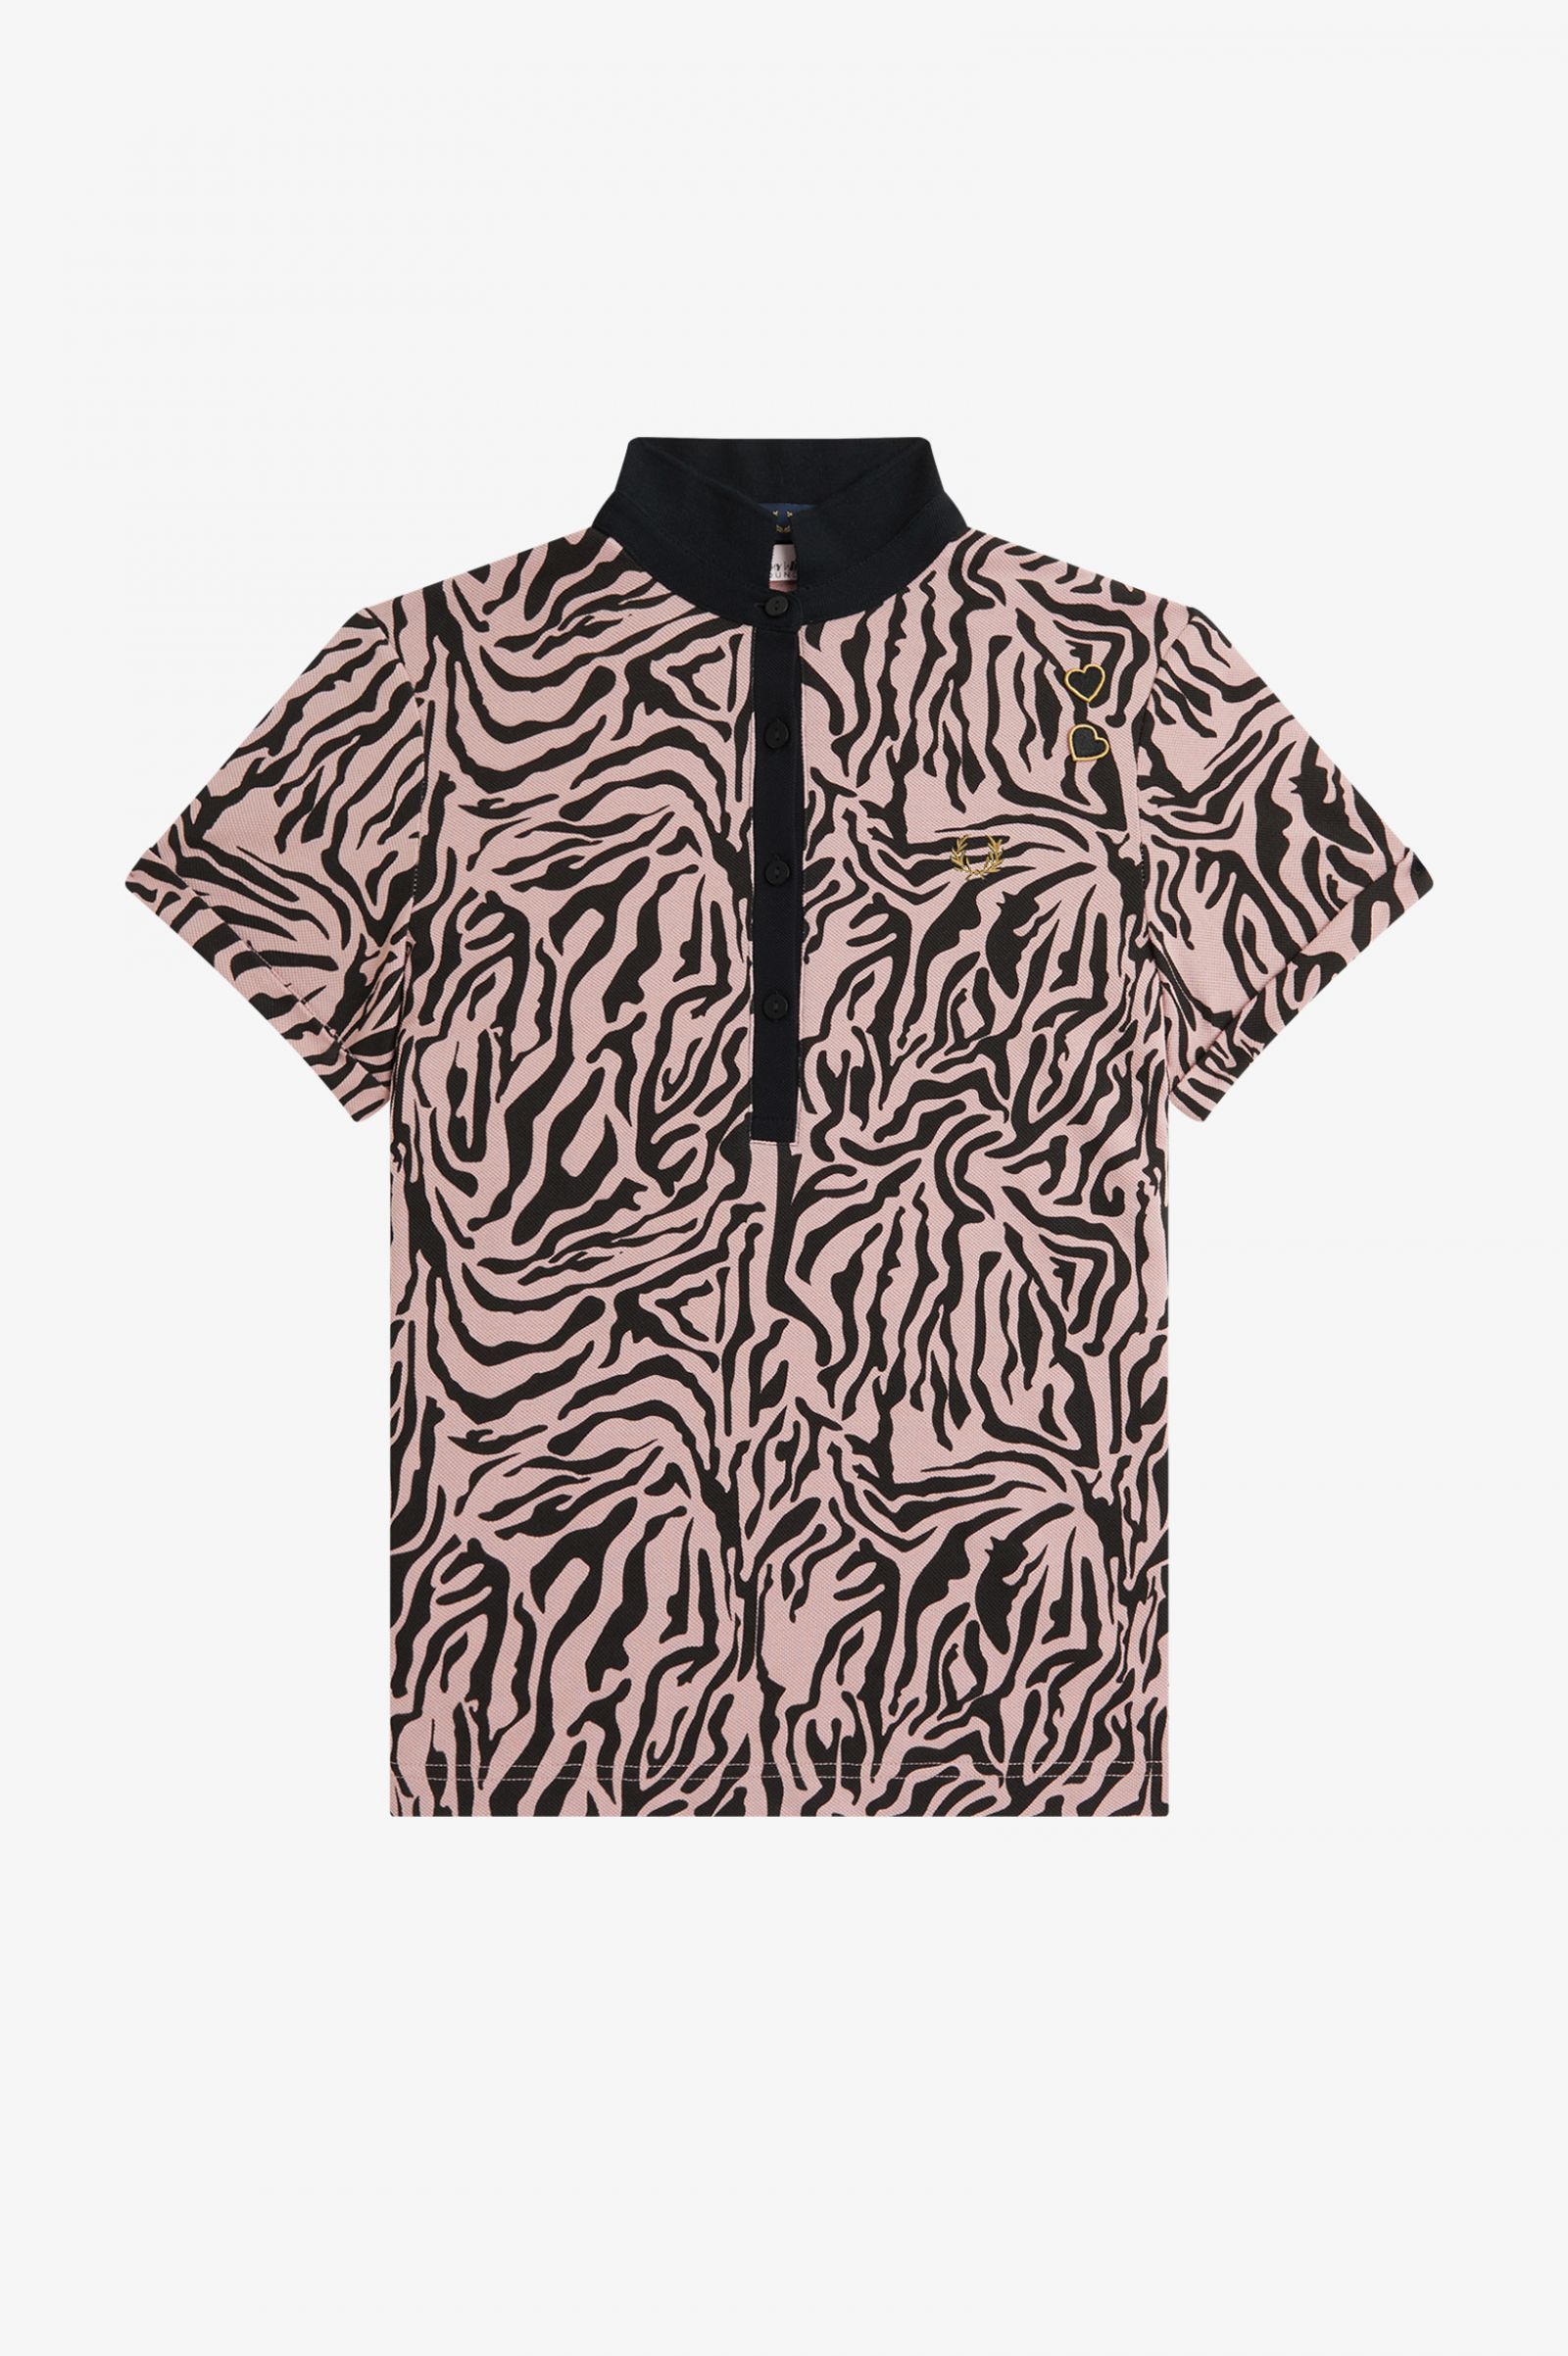 Fred Perry Zebra Print Fred Perry Shirt in Dusty Rose Pink